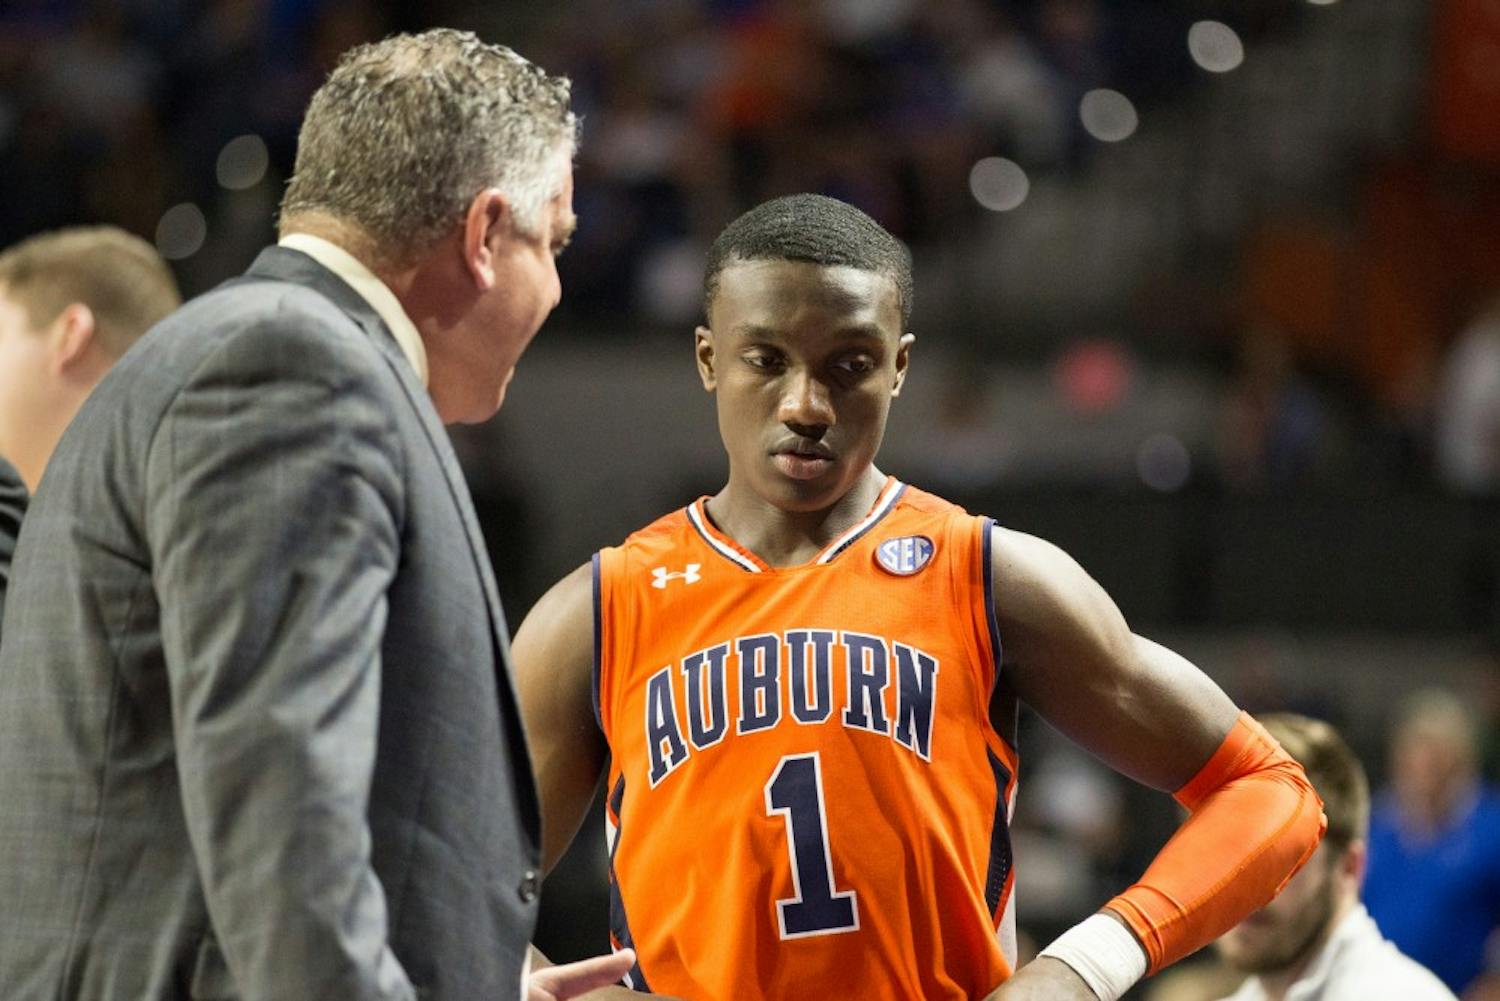 Jared Harper (1) listens to Head Coach Bruce Pearl during a timeout&nbsp;during Auburn basketball vs. Florida on Saturday, Feb. 24, 2018, in Gainesville, Fla. 